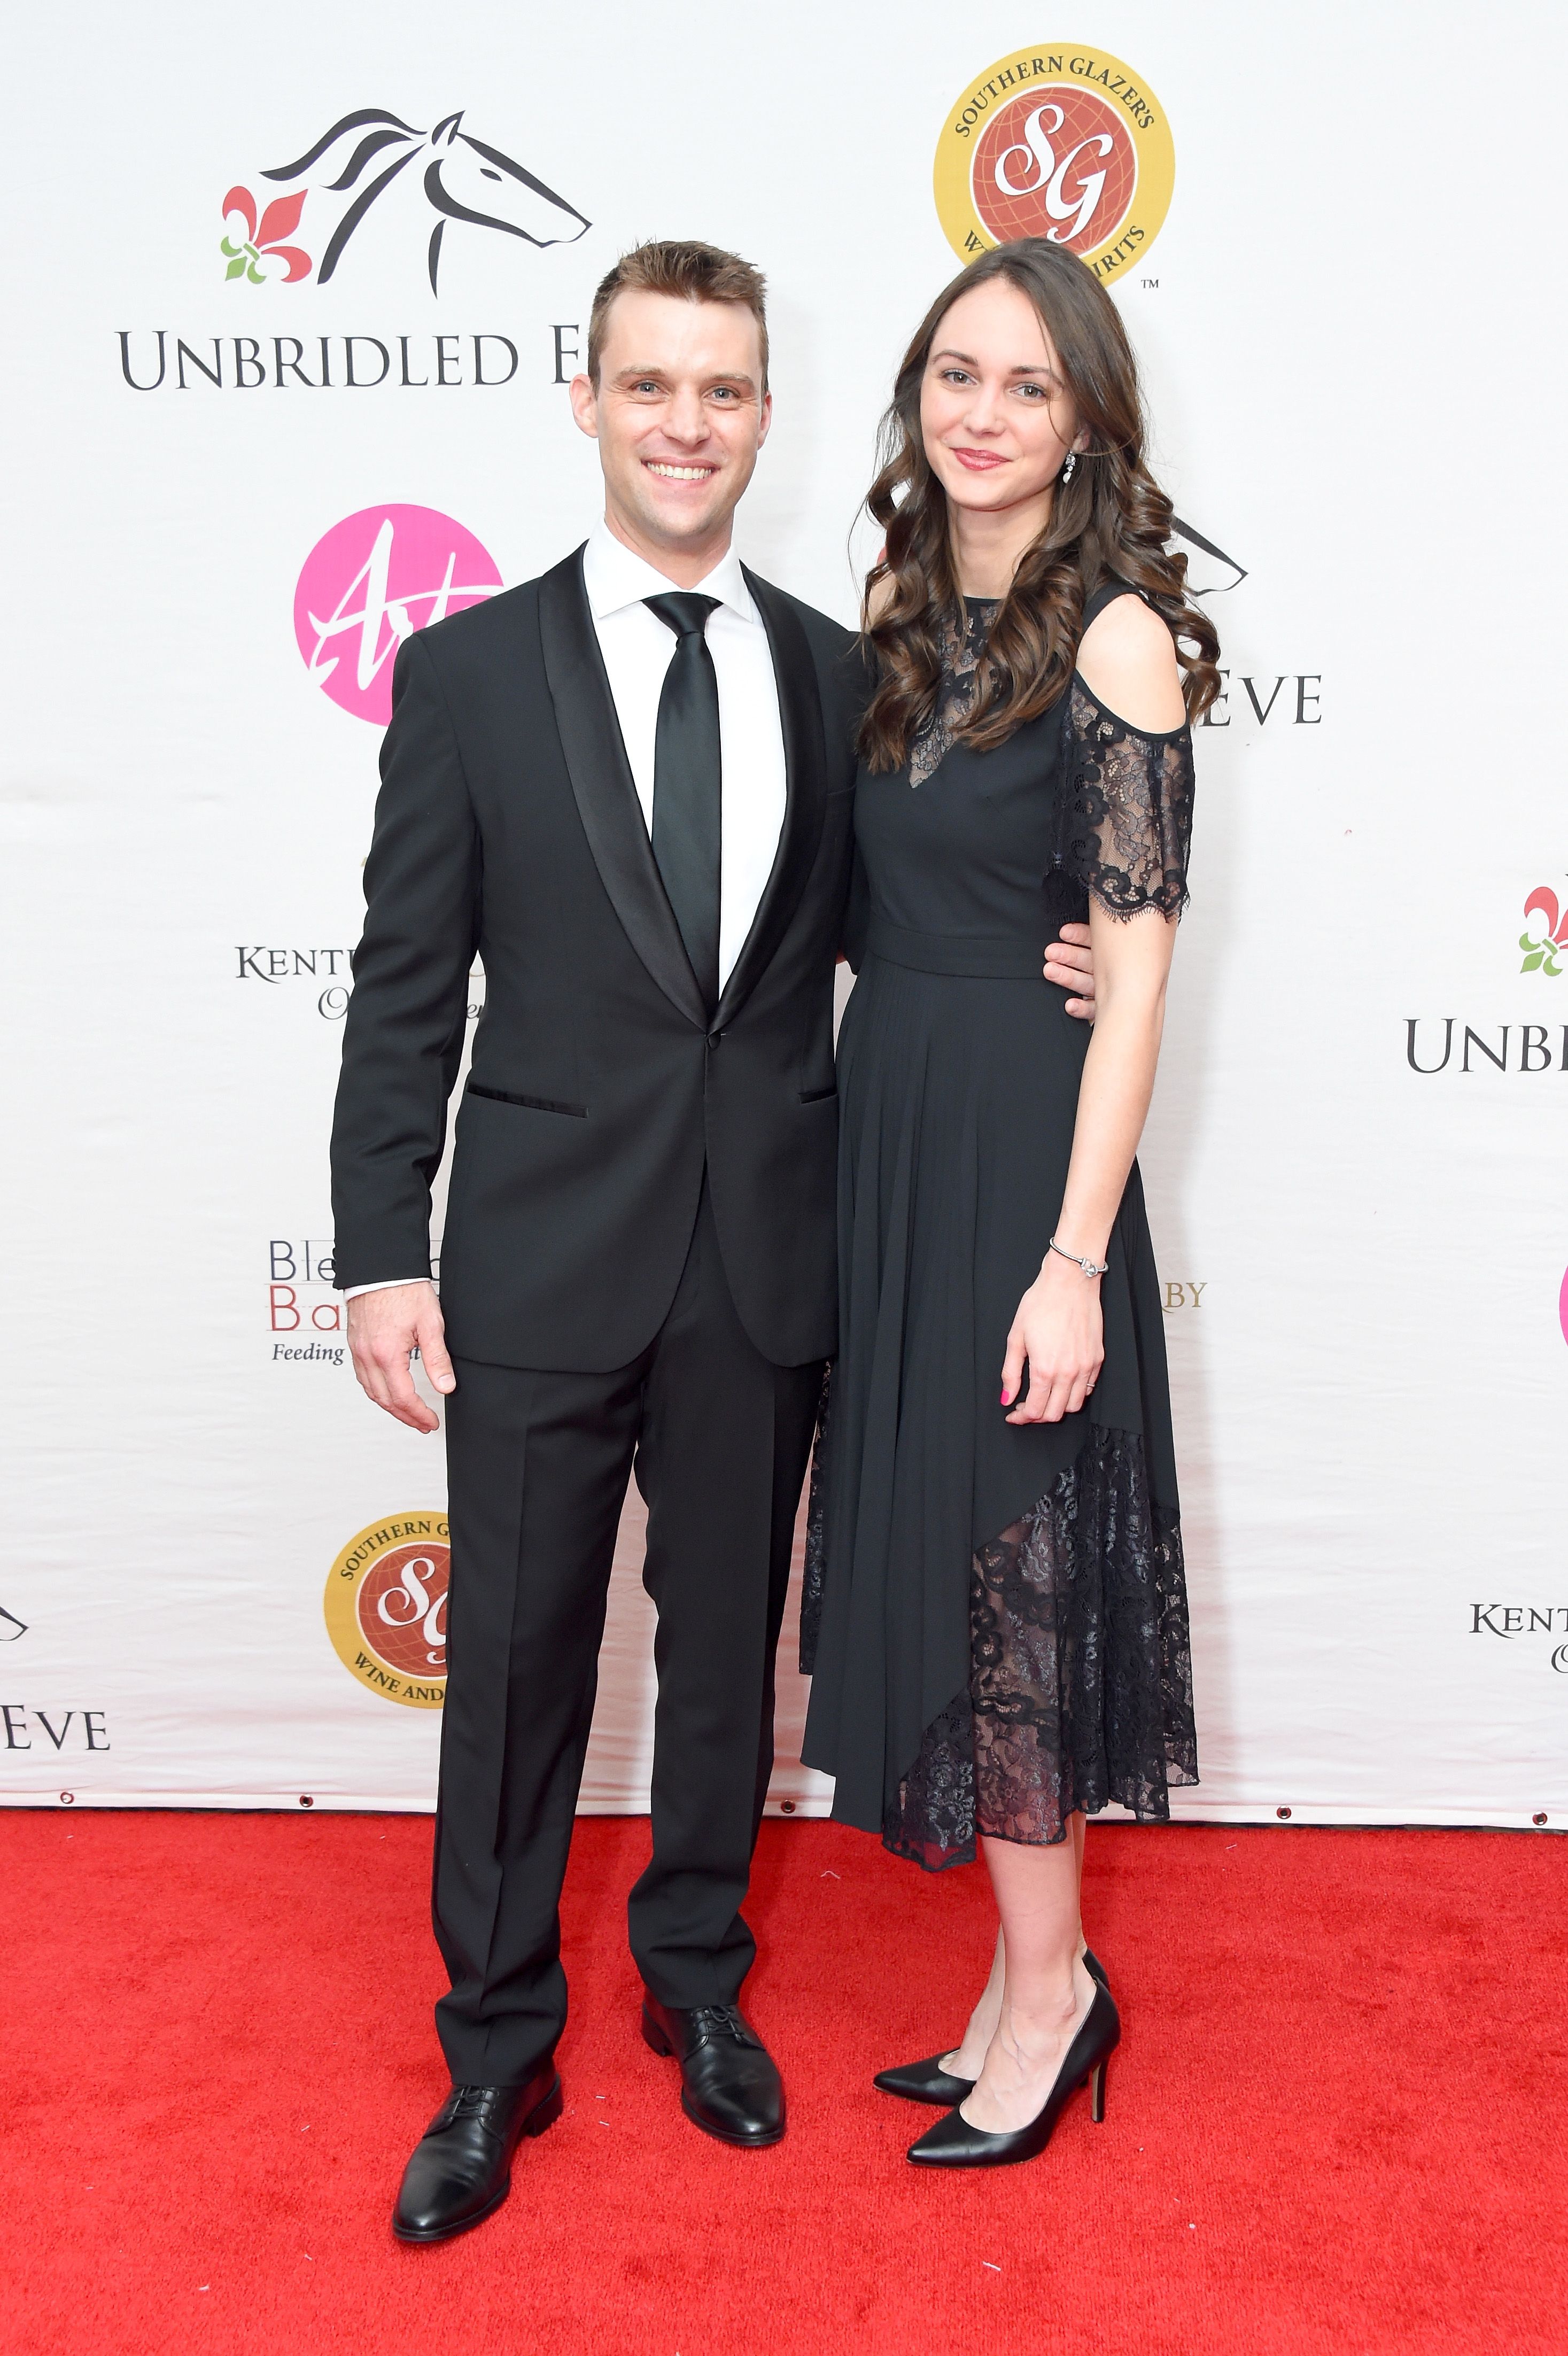 Jesse Spencer and Kali Woodruff during the Unbridled Eve Gala during the 144th Kentucky Derby at Galt House Hotel & Suites on May 4, 2018 in Louisville, Kentucky. | Source: Getty Images